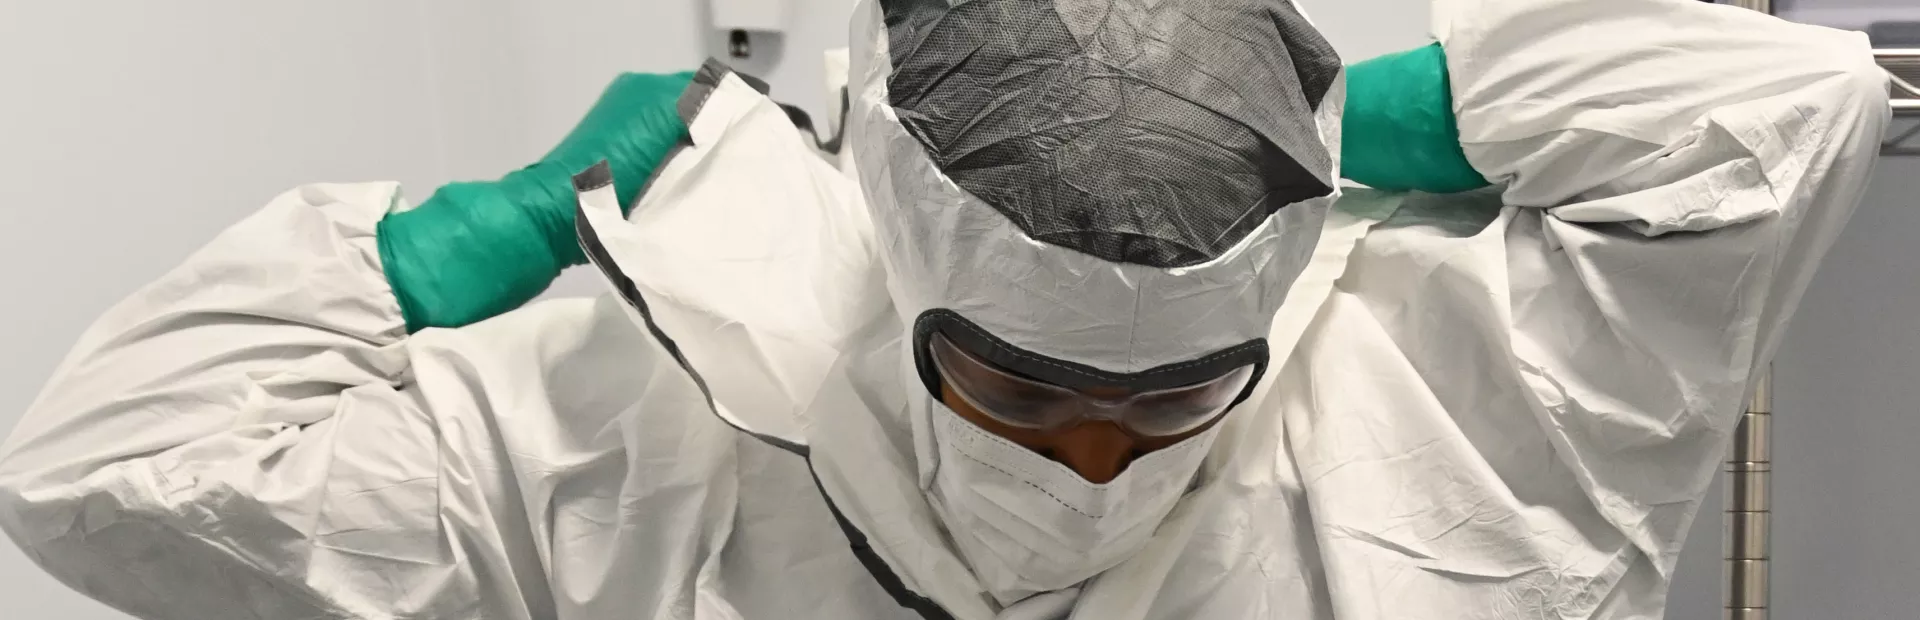 A highly trained Novartis specialist dresses in full personal protective equipment to work on the radioligand therapy production line